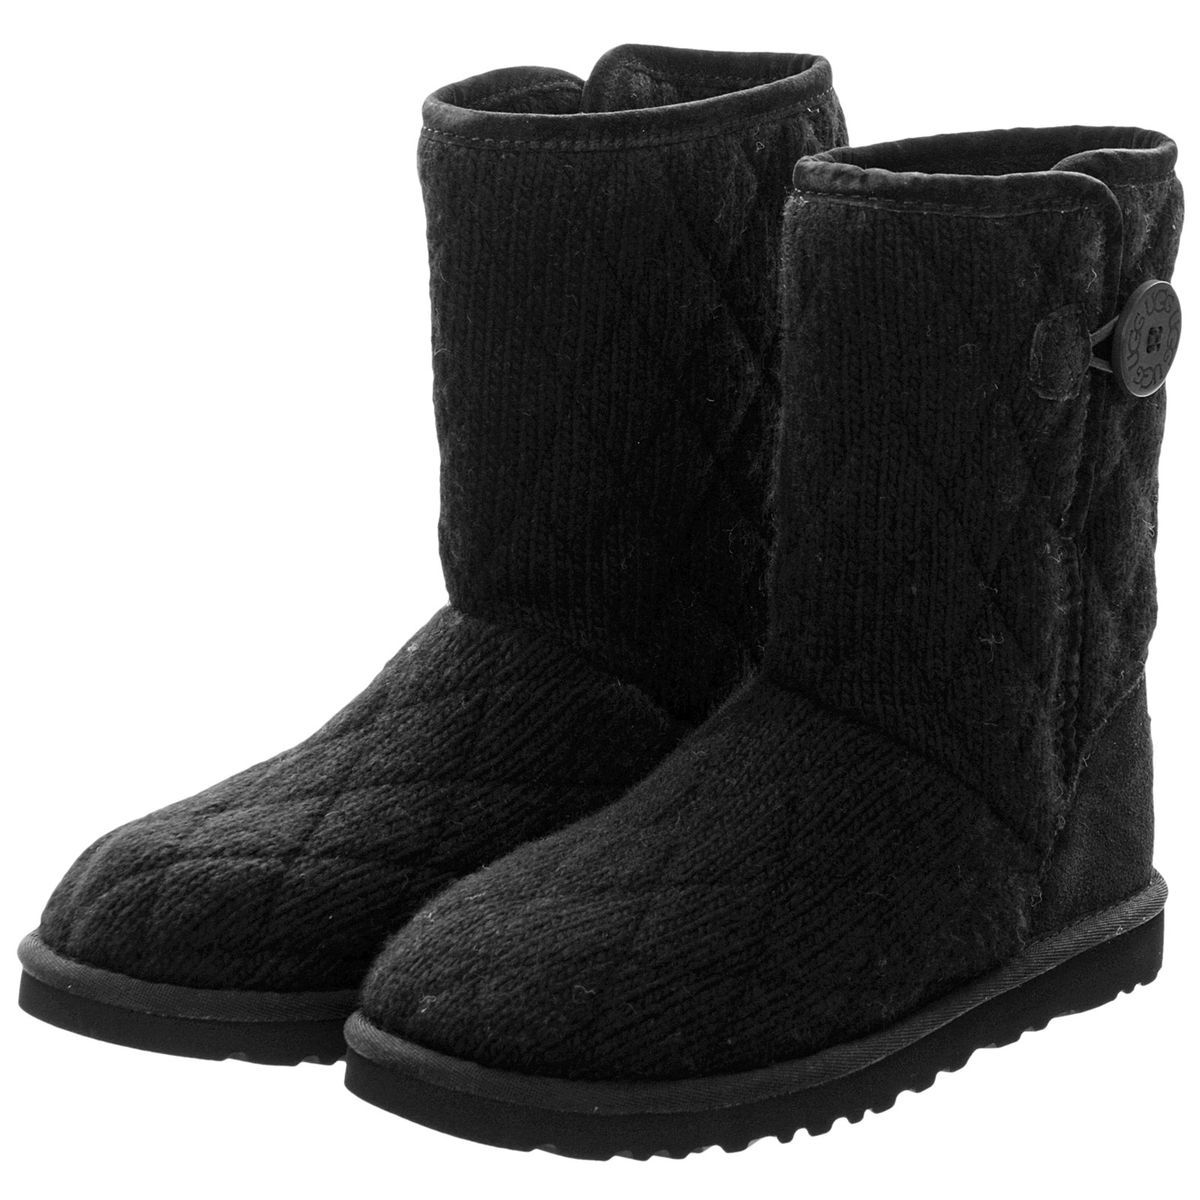 Auth Womens UGG Australia Black Mountain Quilted Short Boots 3176 Size 